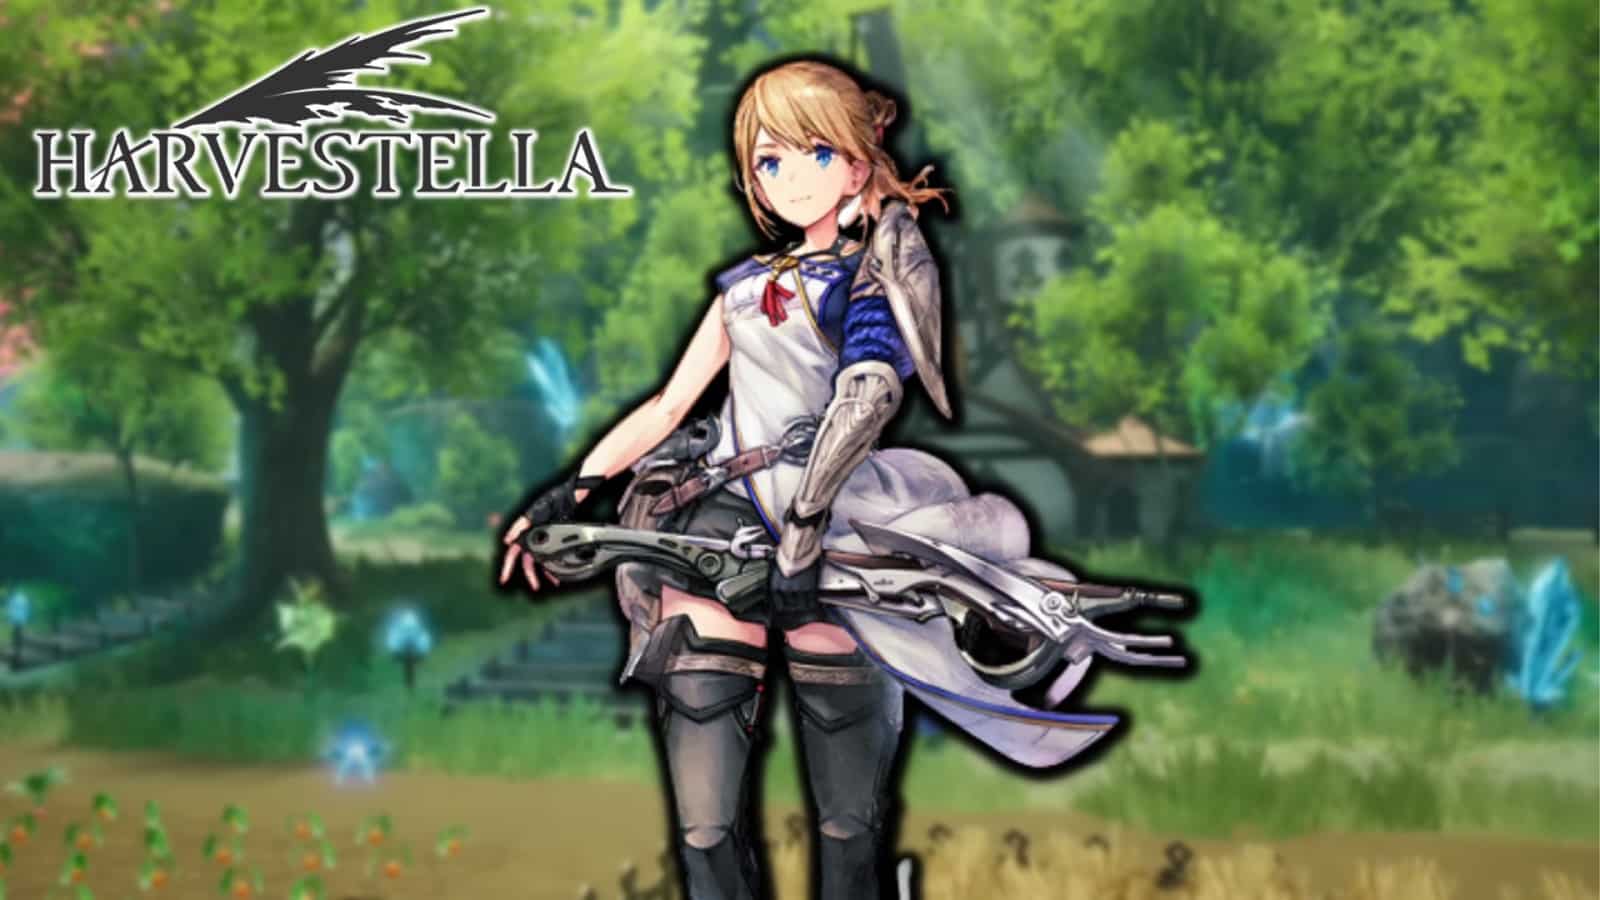 Harvestella protagonist in a forest